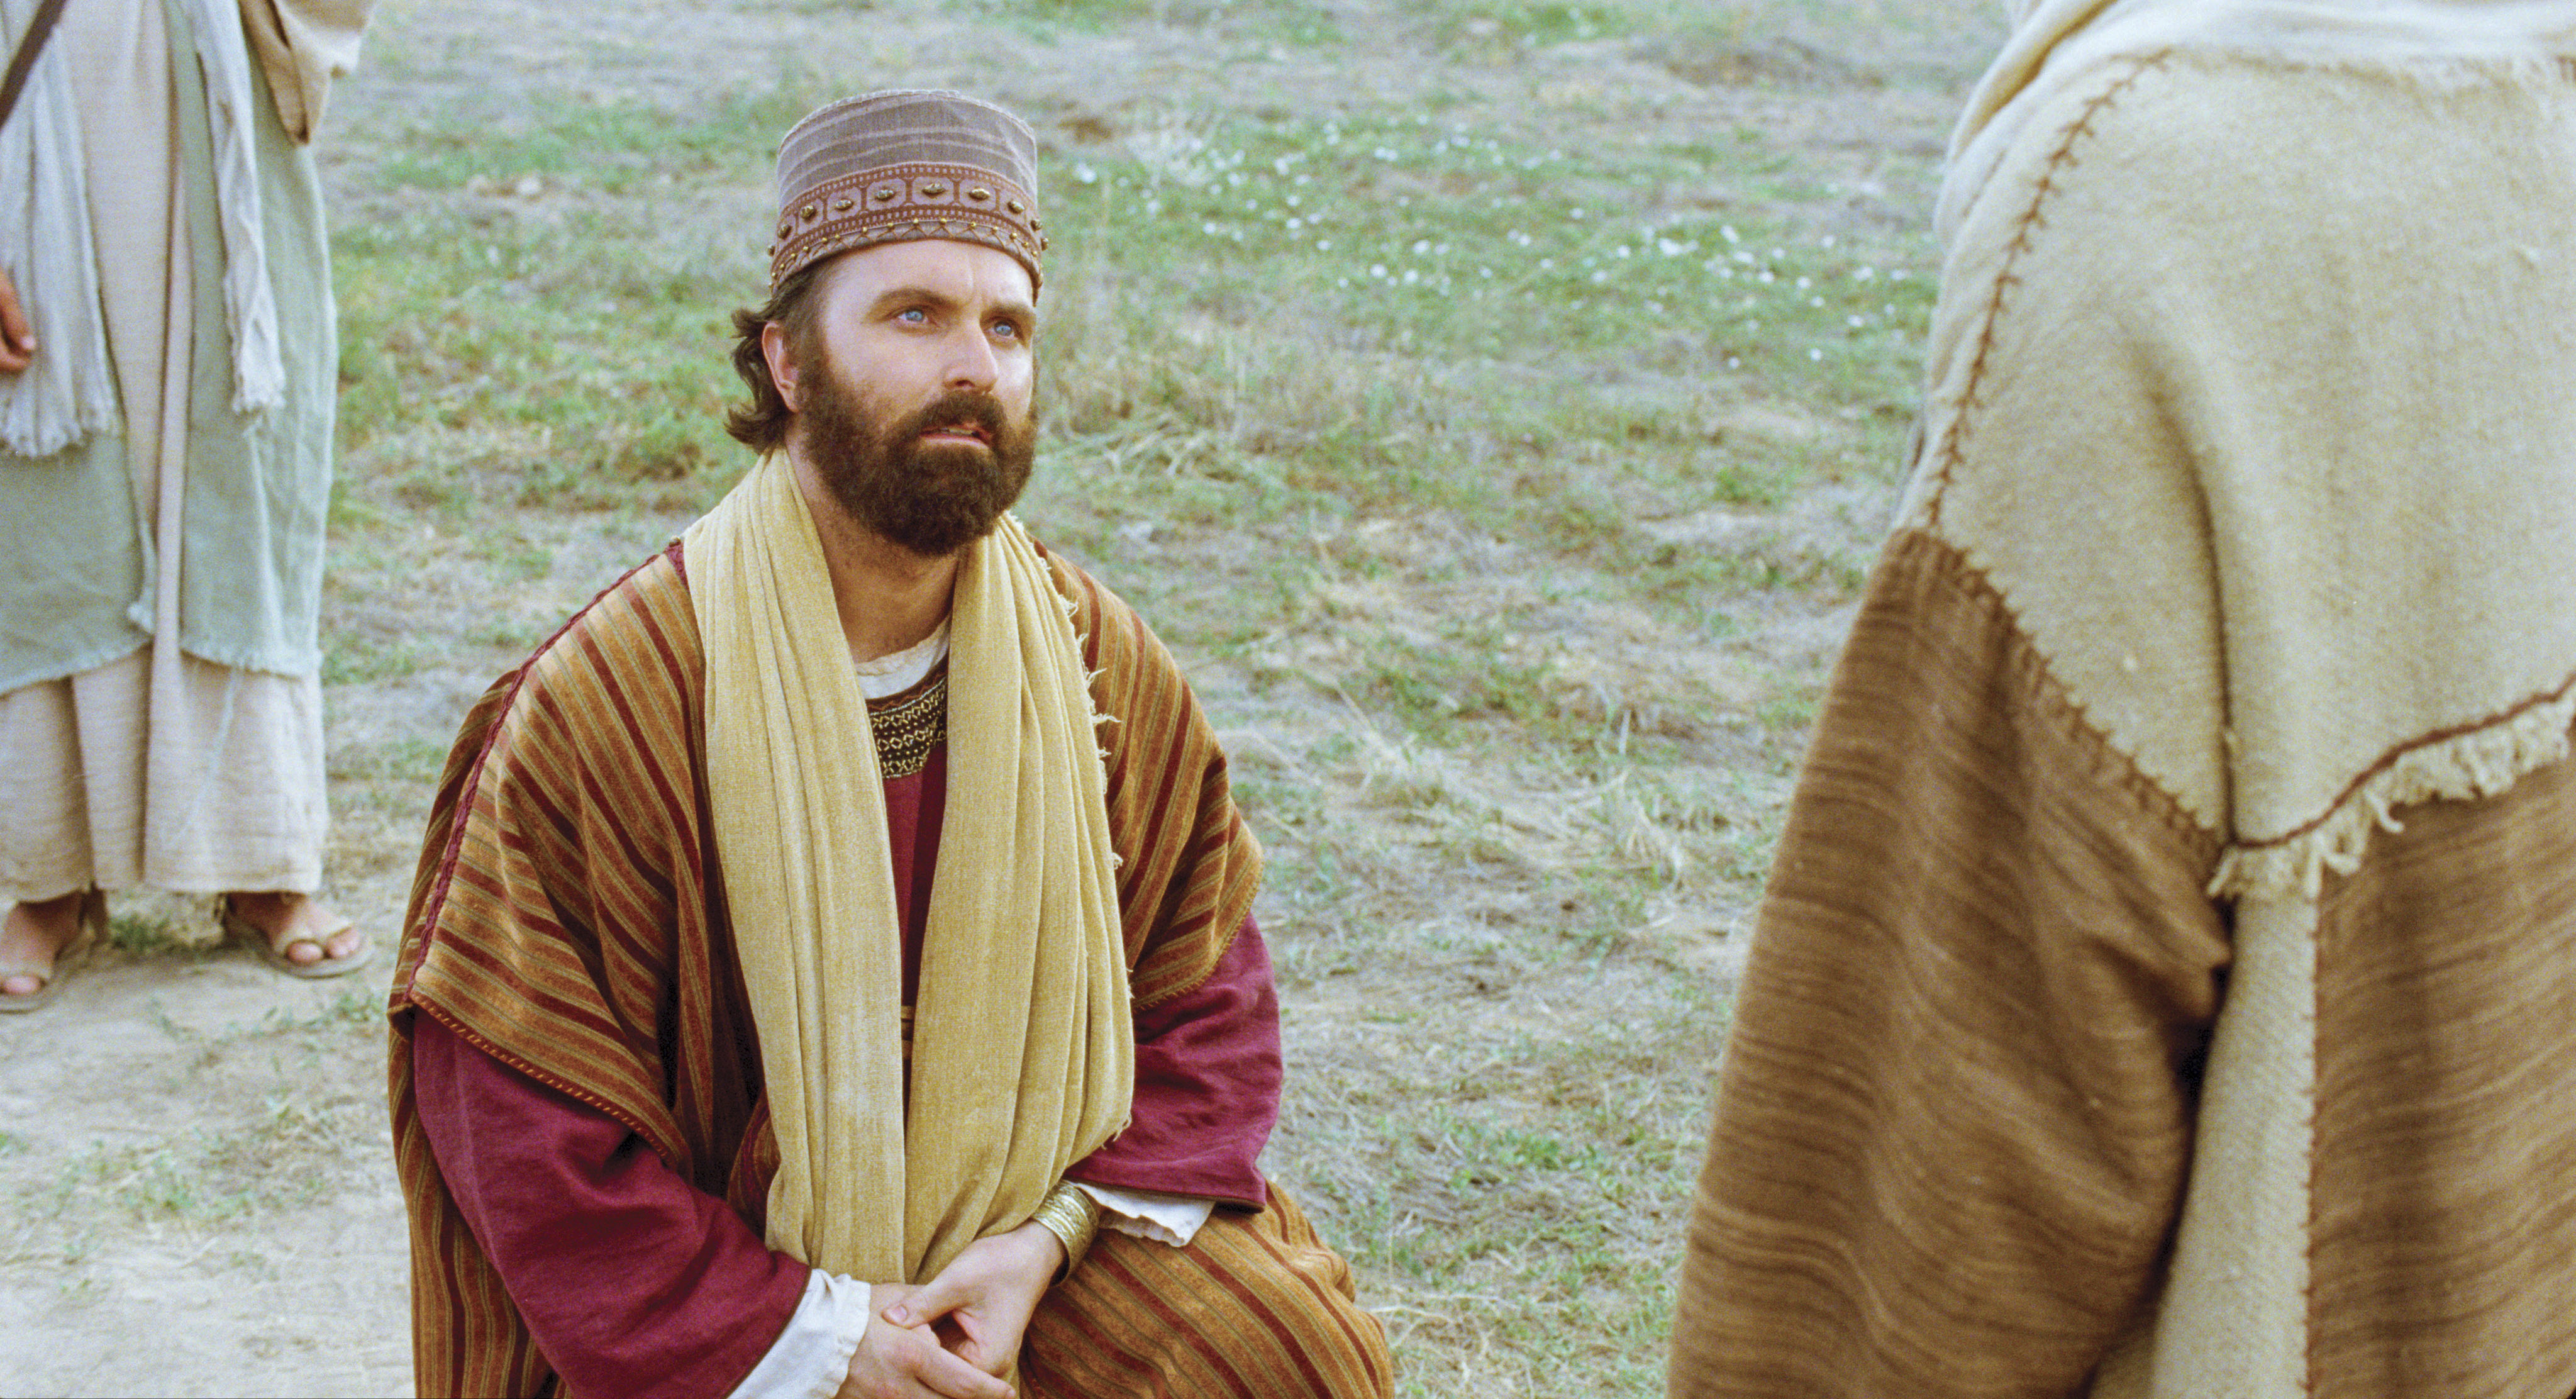 The rich young ruler kneels before Christ and asks Him what he should do to have eternal life.